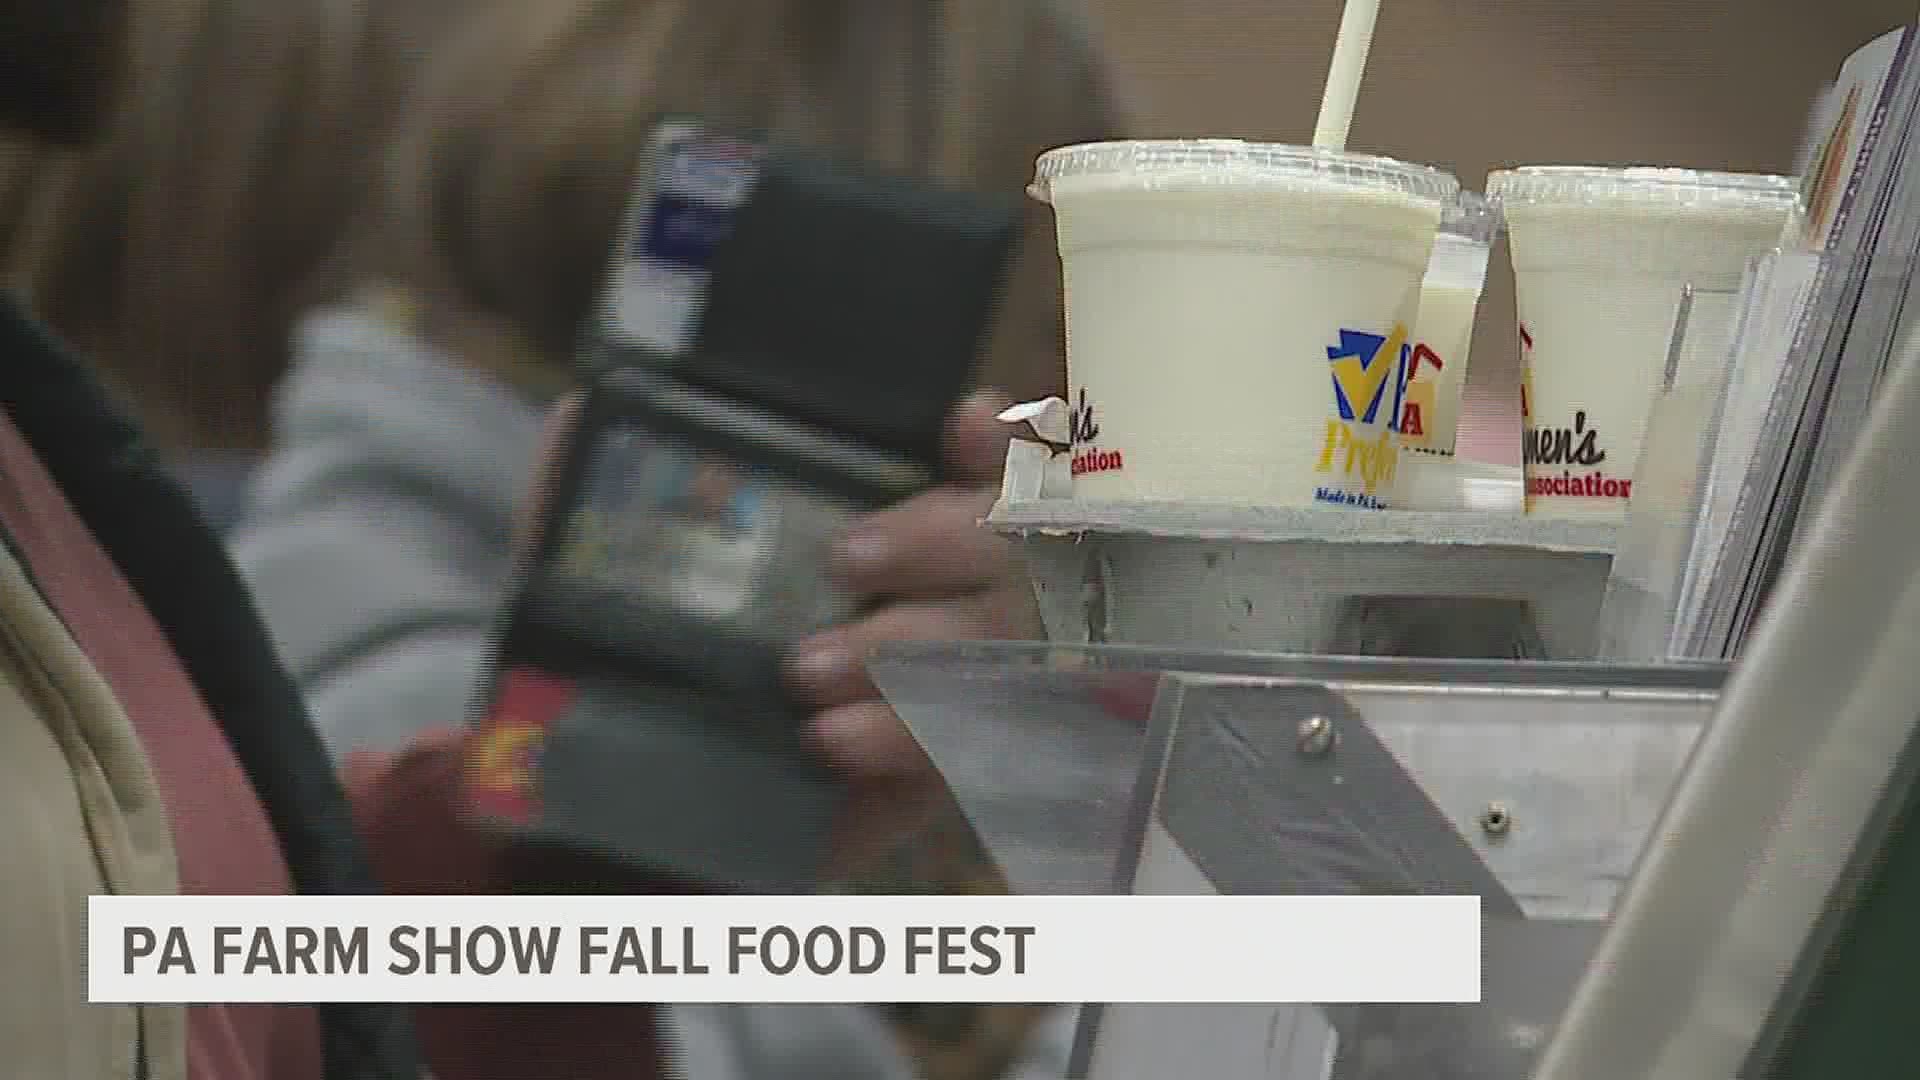 Despite the PA Farm Show being virtual this year, people can get their food and drink favorites at the Fall Food Fest